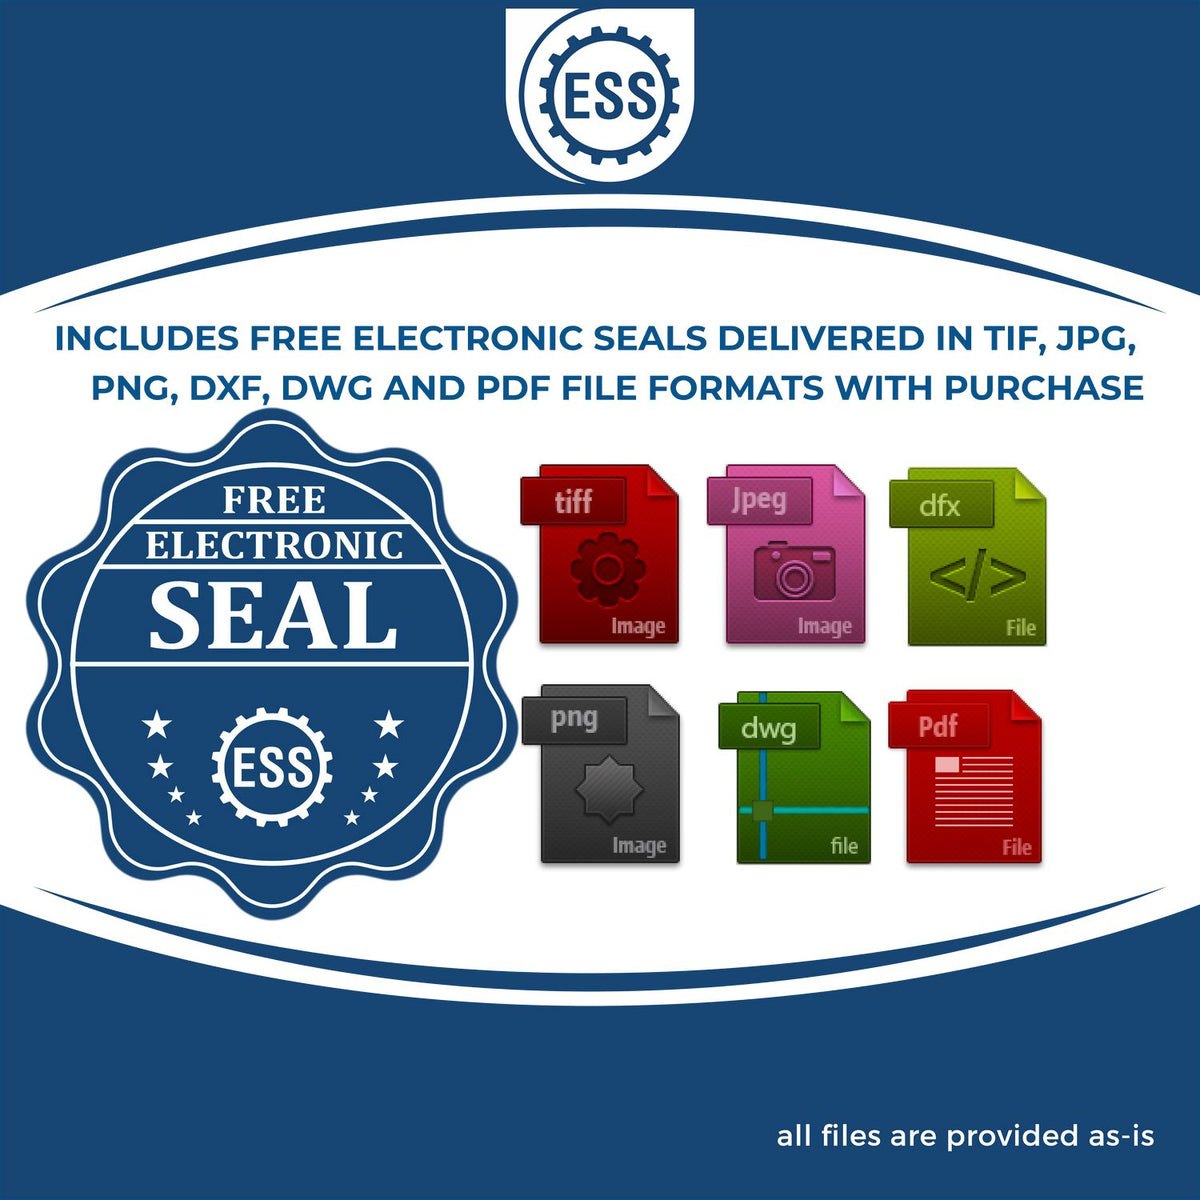 An infographic for the free electronic seal for the Gift North Carolina Land Surveyor Seal illustrating the different file type icons such as DXF, DWG, TIF, JPG and PNG.